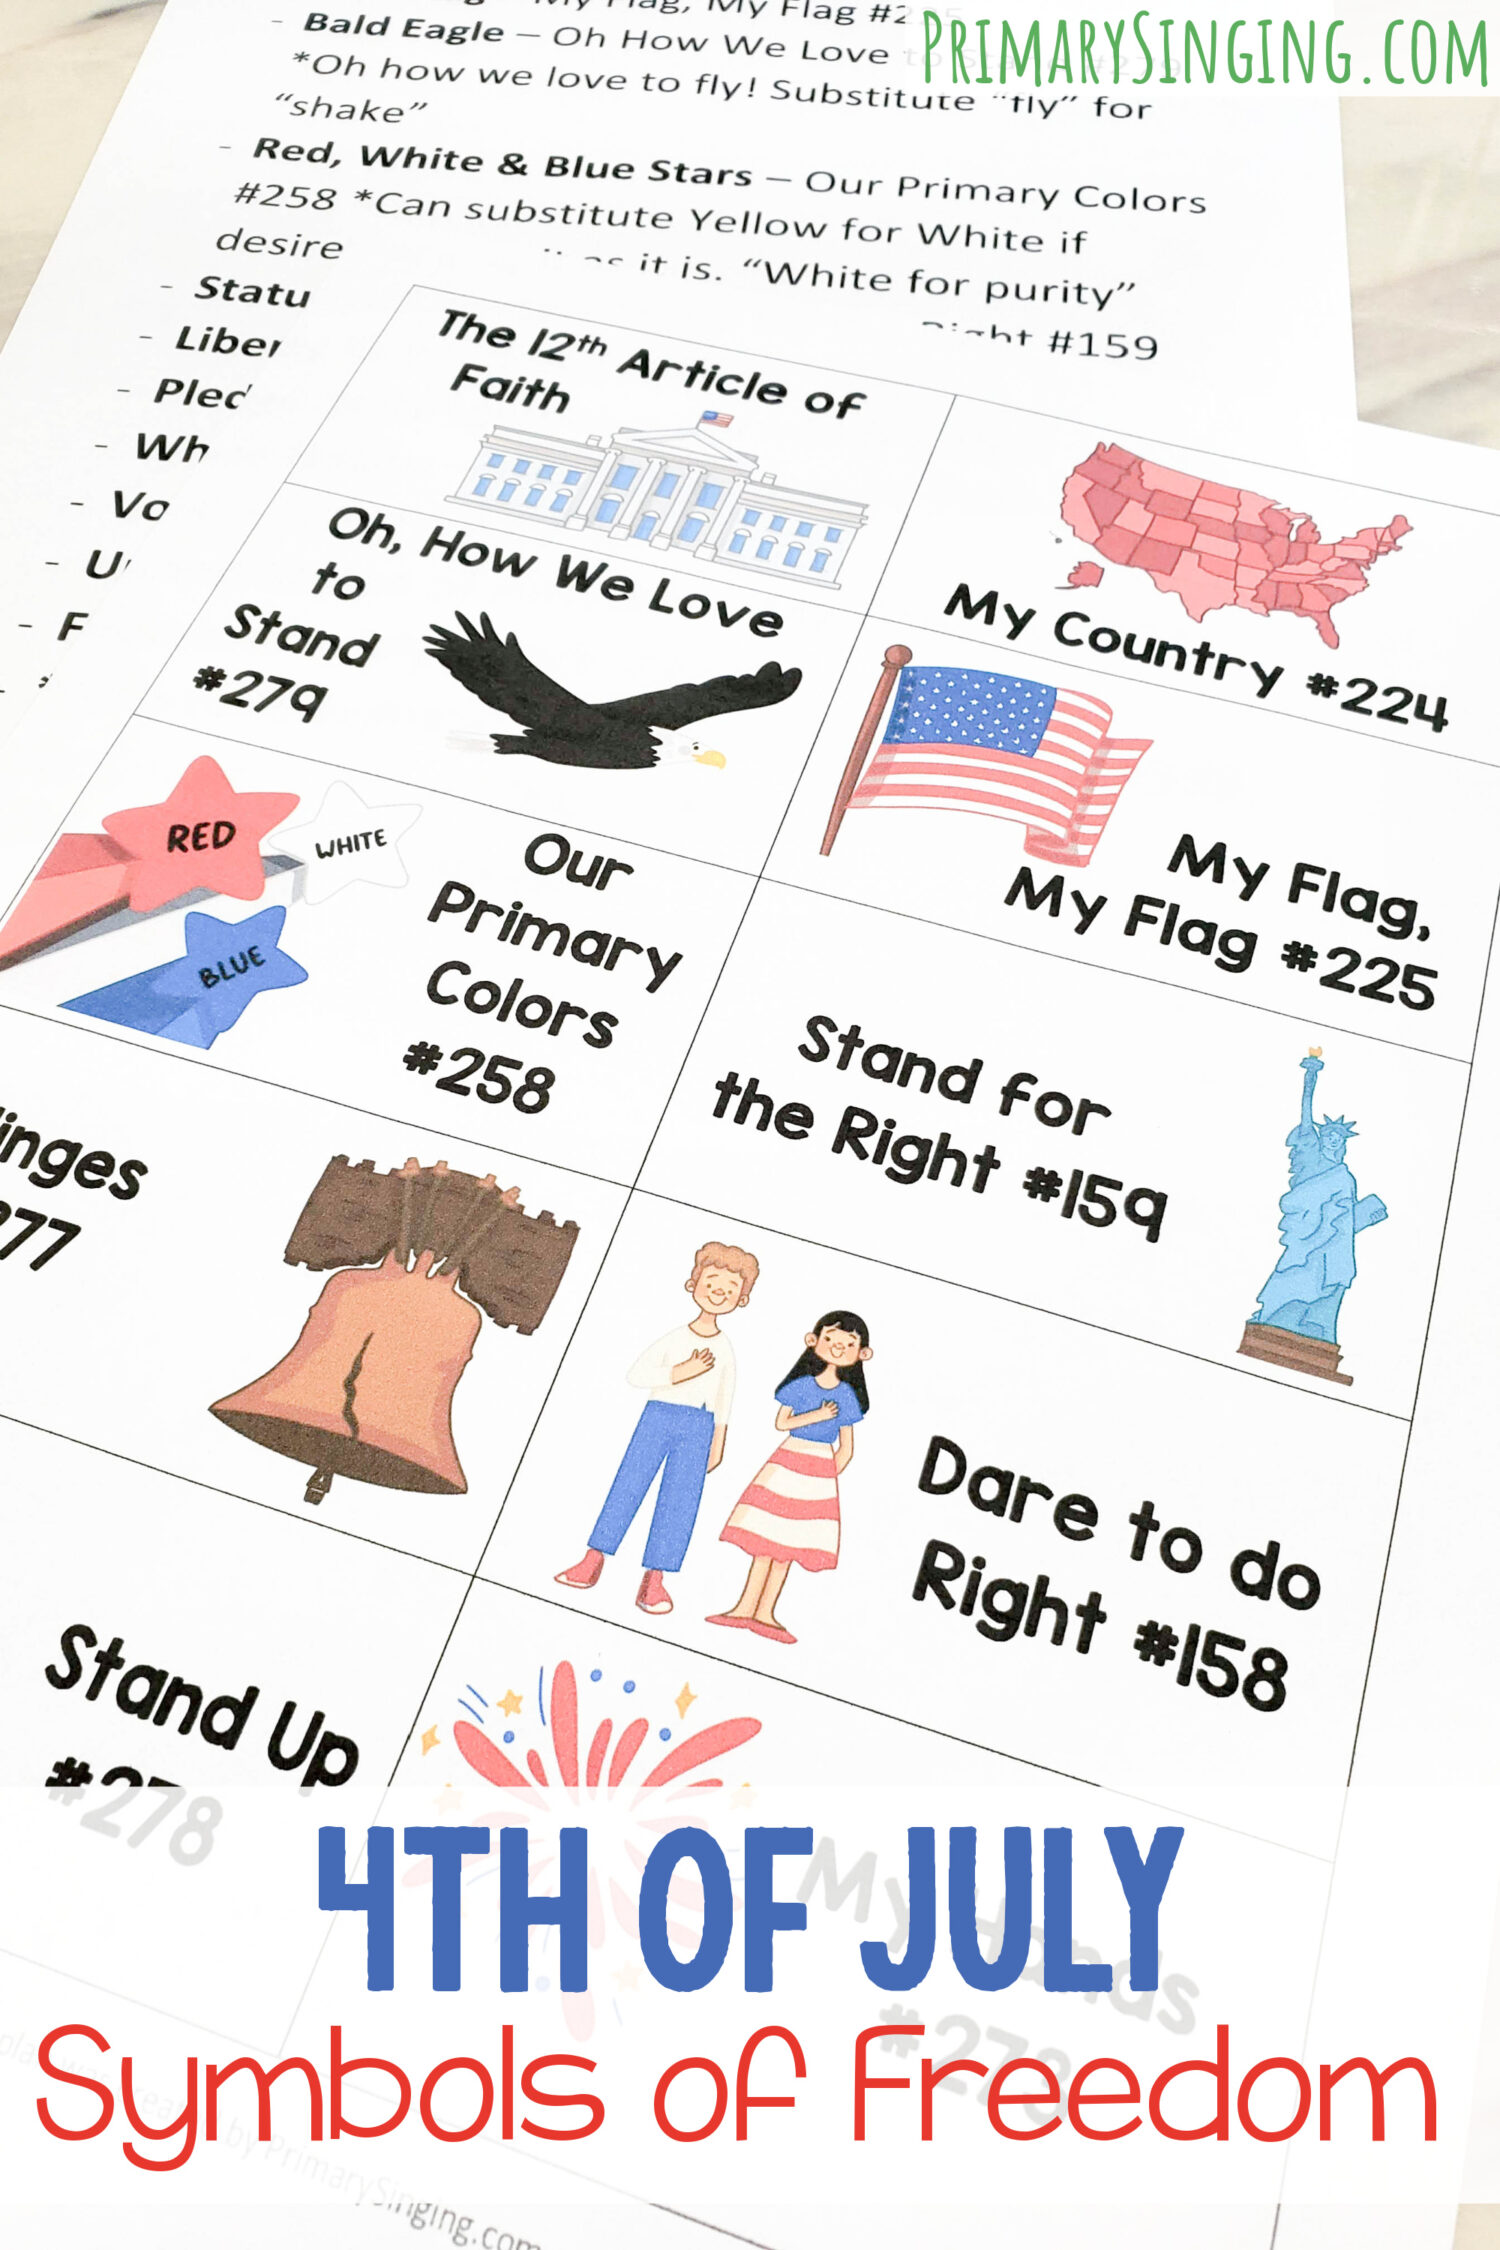 4th of July Patriotic Symbols of Freedom Singing Time activity fun lesson plan with ways to sing that match the symbols or LDS Primary patriotic songs to fit the holiday season! Sing holiday songs or your choice of songs for review. Includes printable song helps for LDS Primary music leaders.